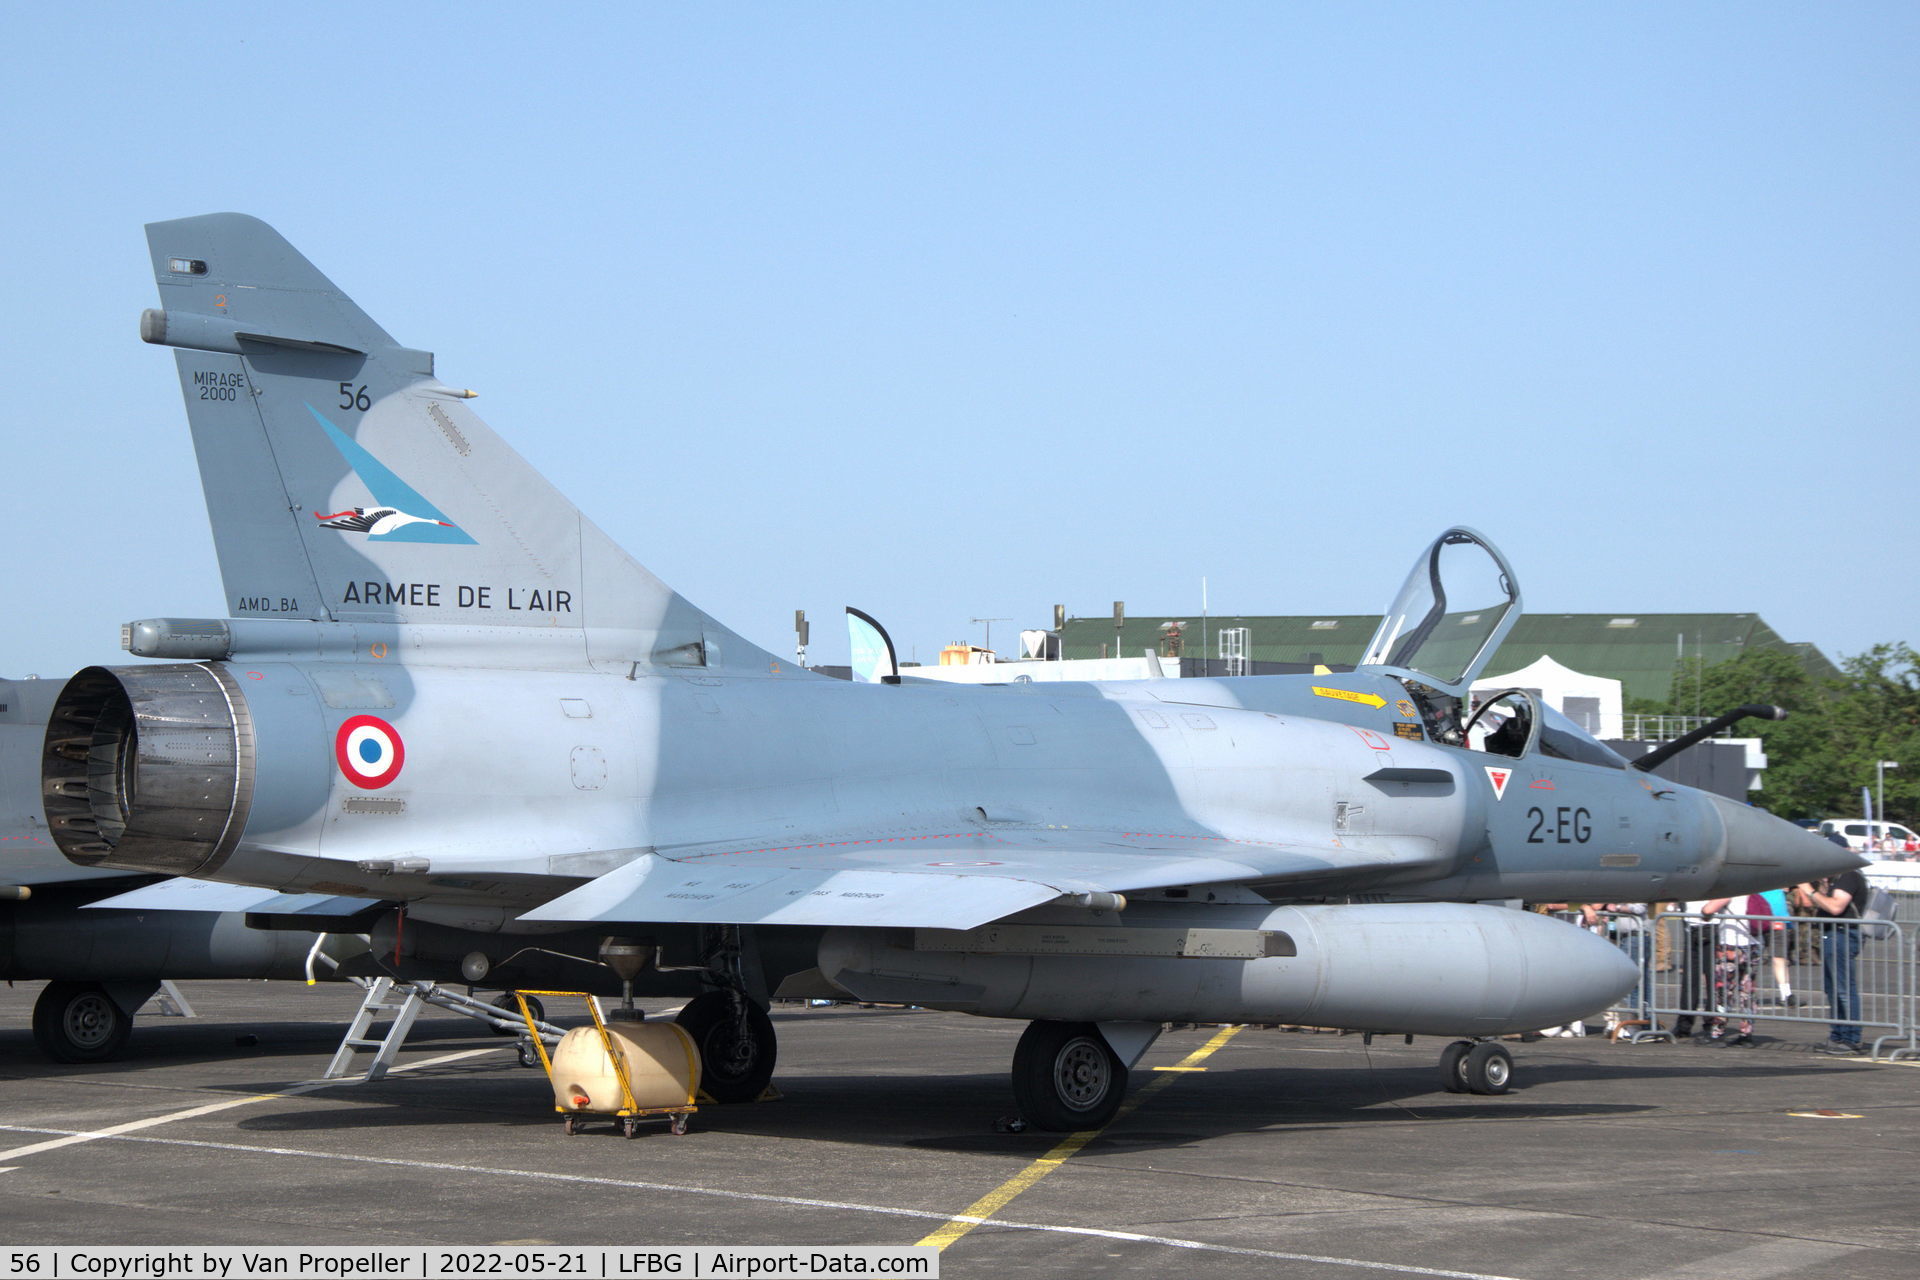 56, Dassault Mirage 2000-5F C/N 256, Dassault Mirage 2000-5F fighter of the French Air Force at BA709 Cognac - Châteaubernard Air Base, France, 21 may 2022